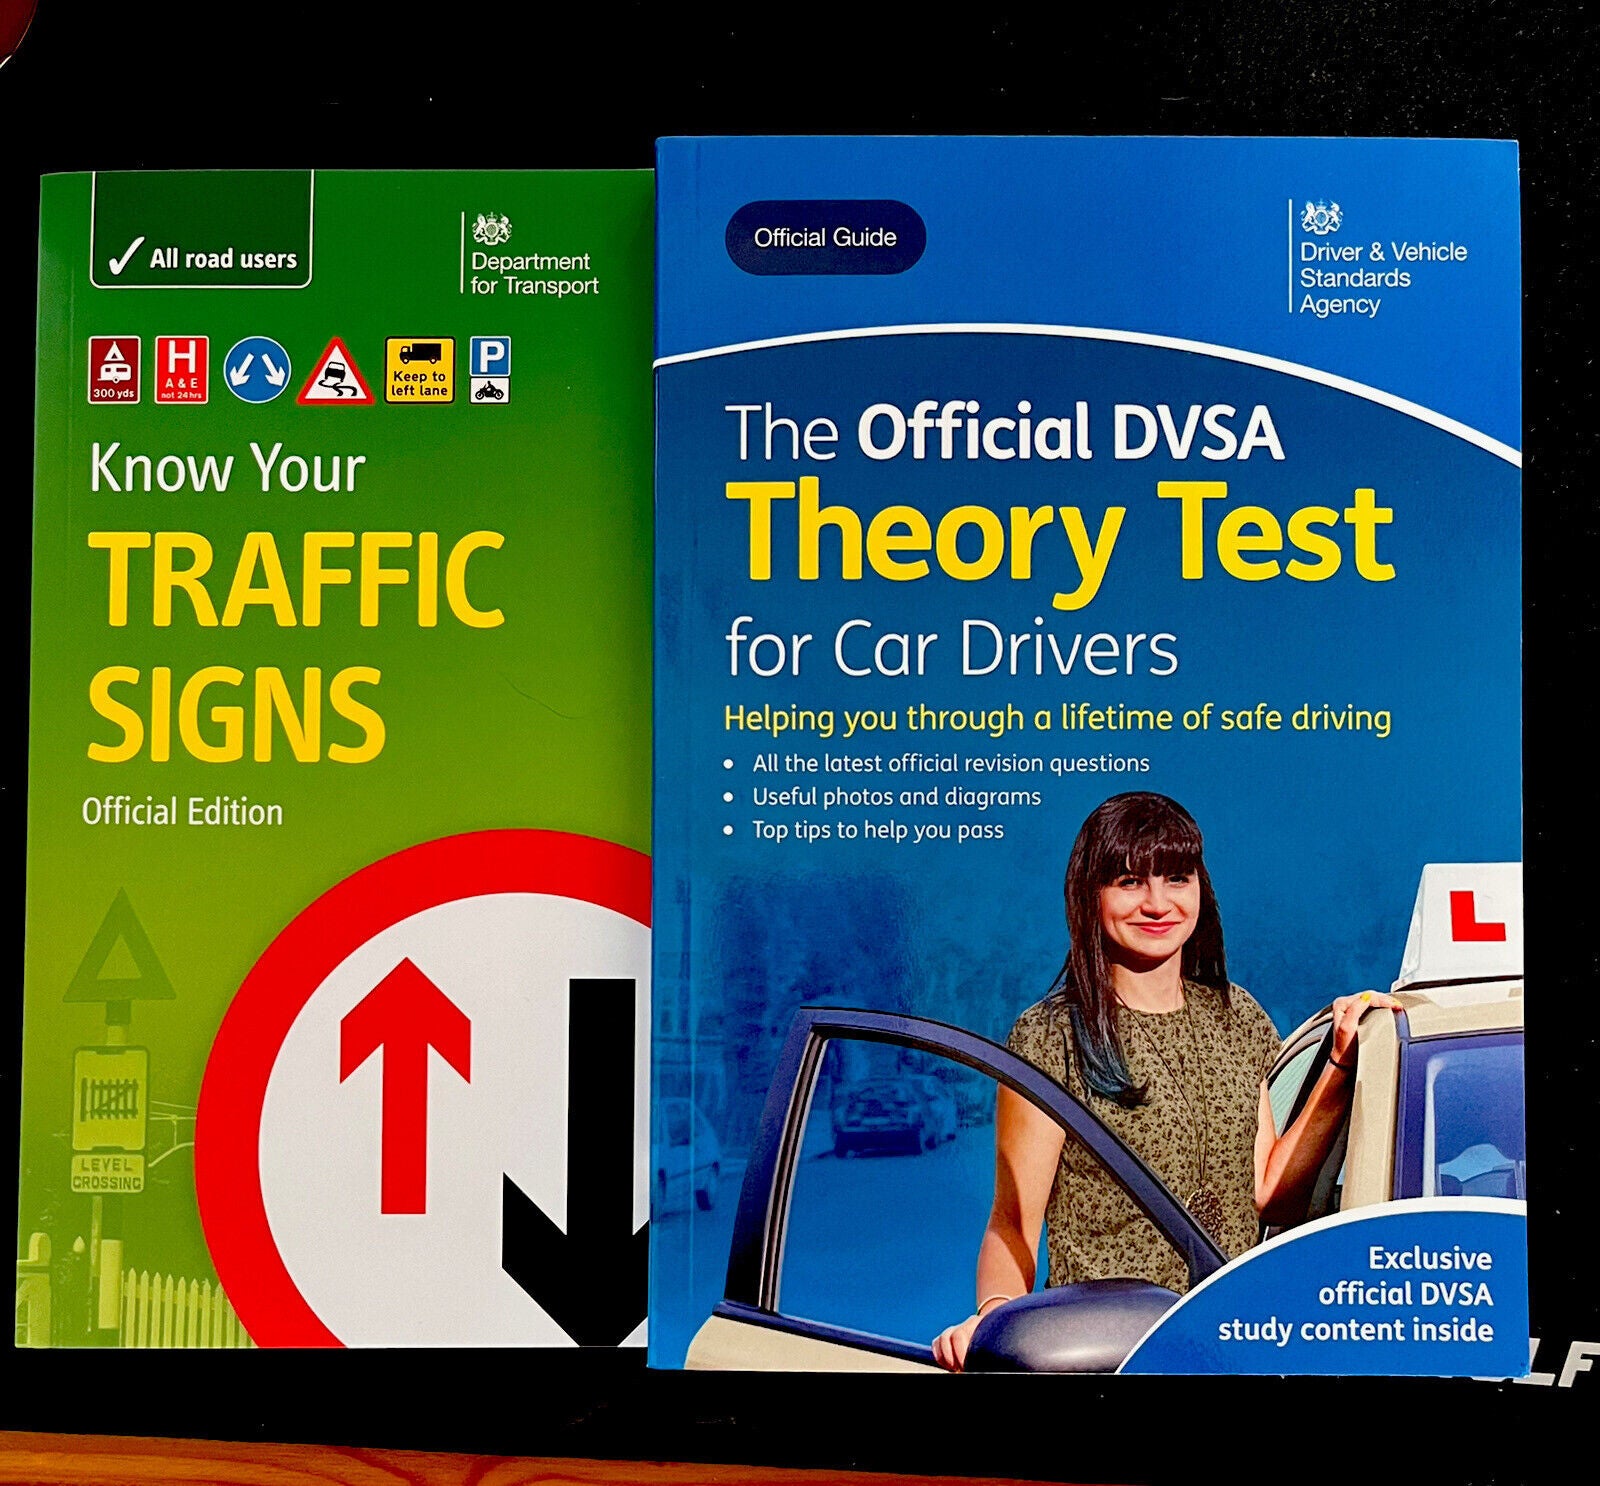 driving theory test Car Pack Ideal For Learner Drivers And ADI PART ONE - Driver Training Ltd